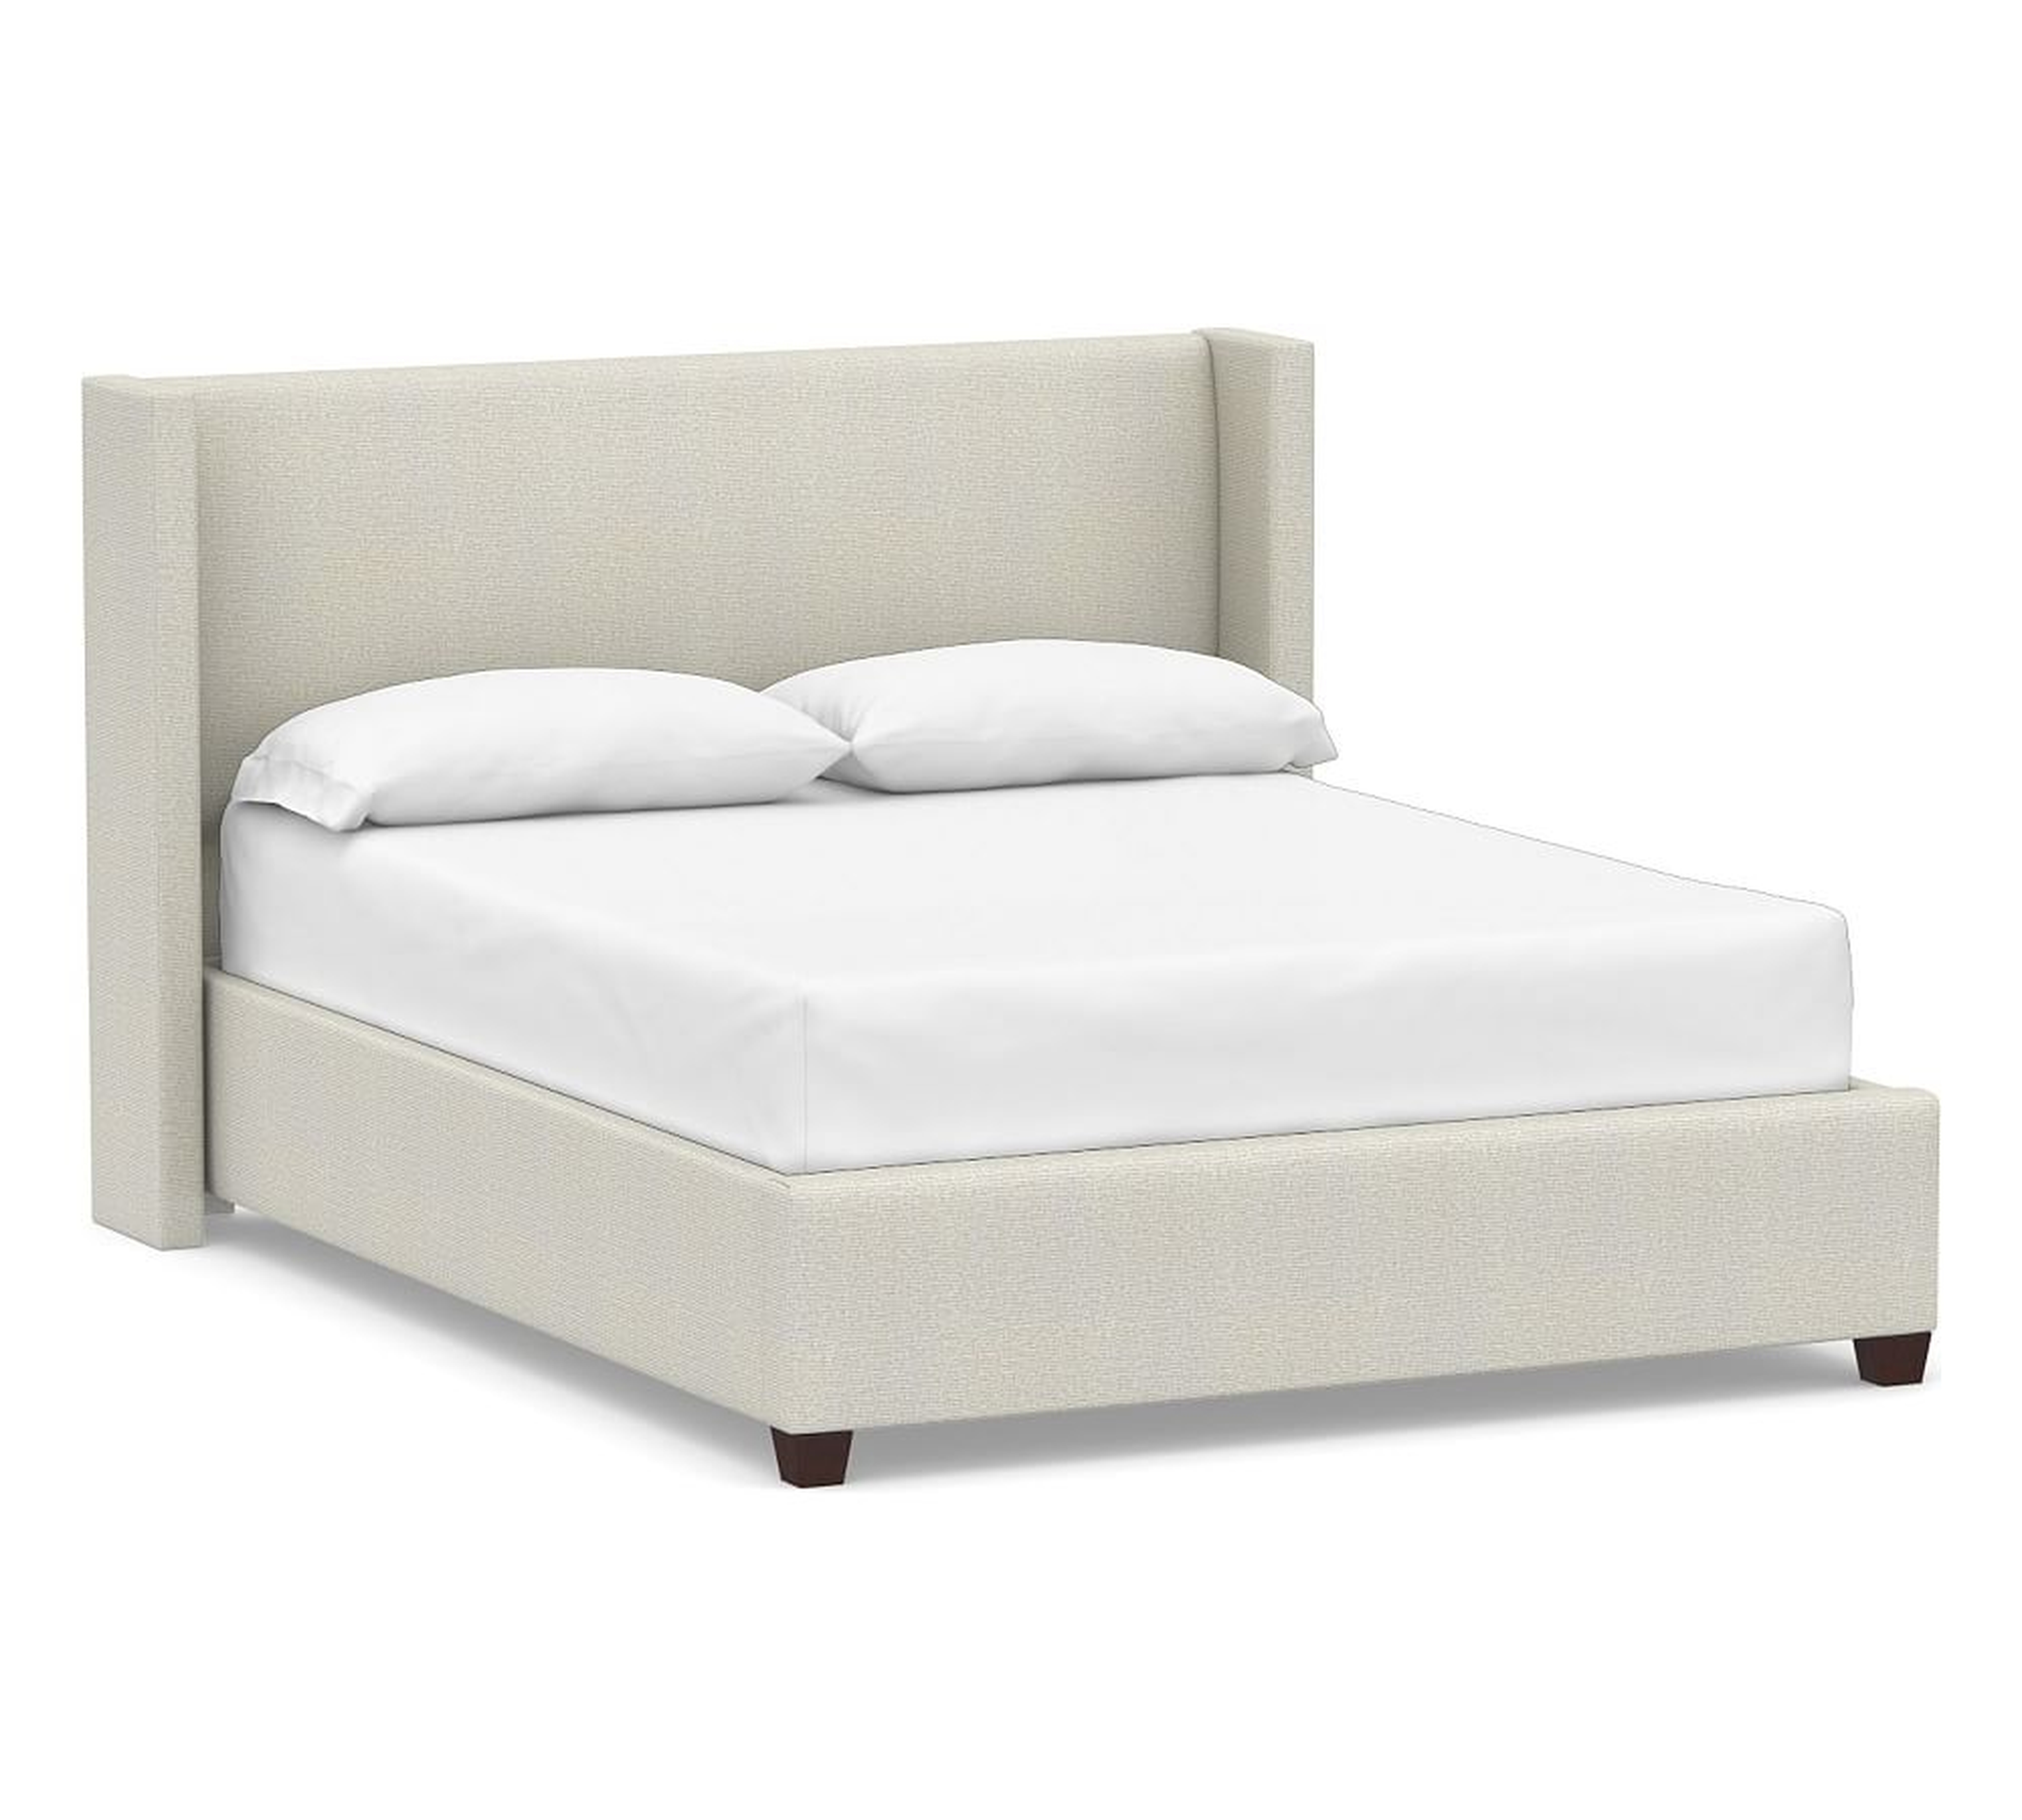 Elliot Shelter Bed, King, Low Headboard 46.5"h, Performance Heathered Basketweave Dove - Pottery Barn